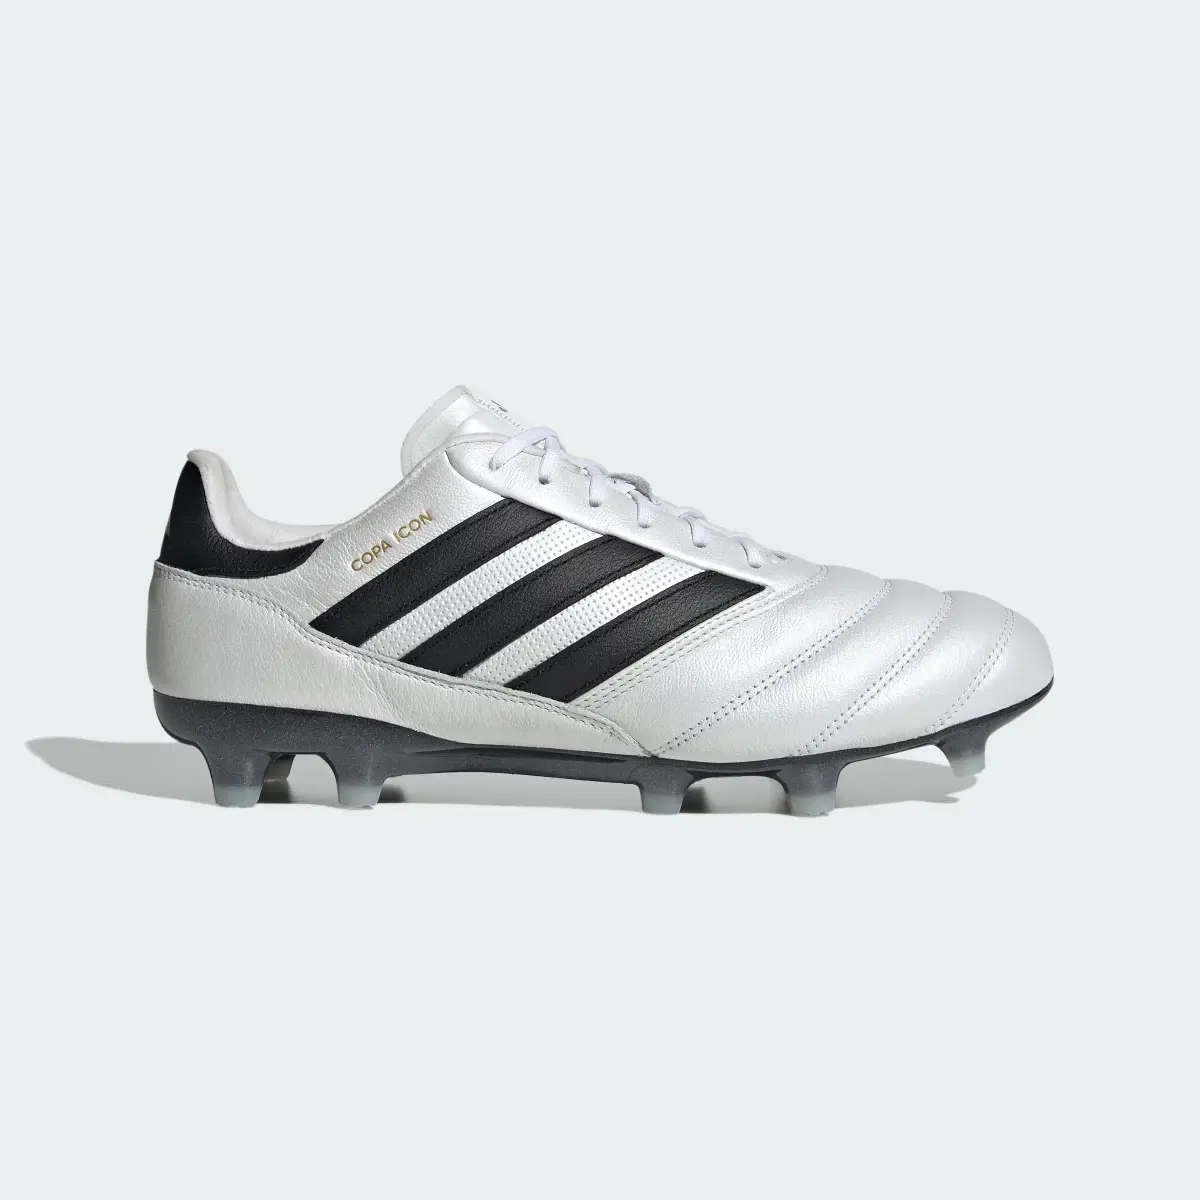 Adidas Copa Icon Firm Ground Boots. 2